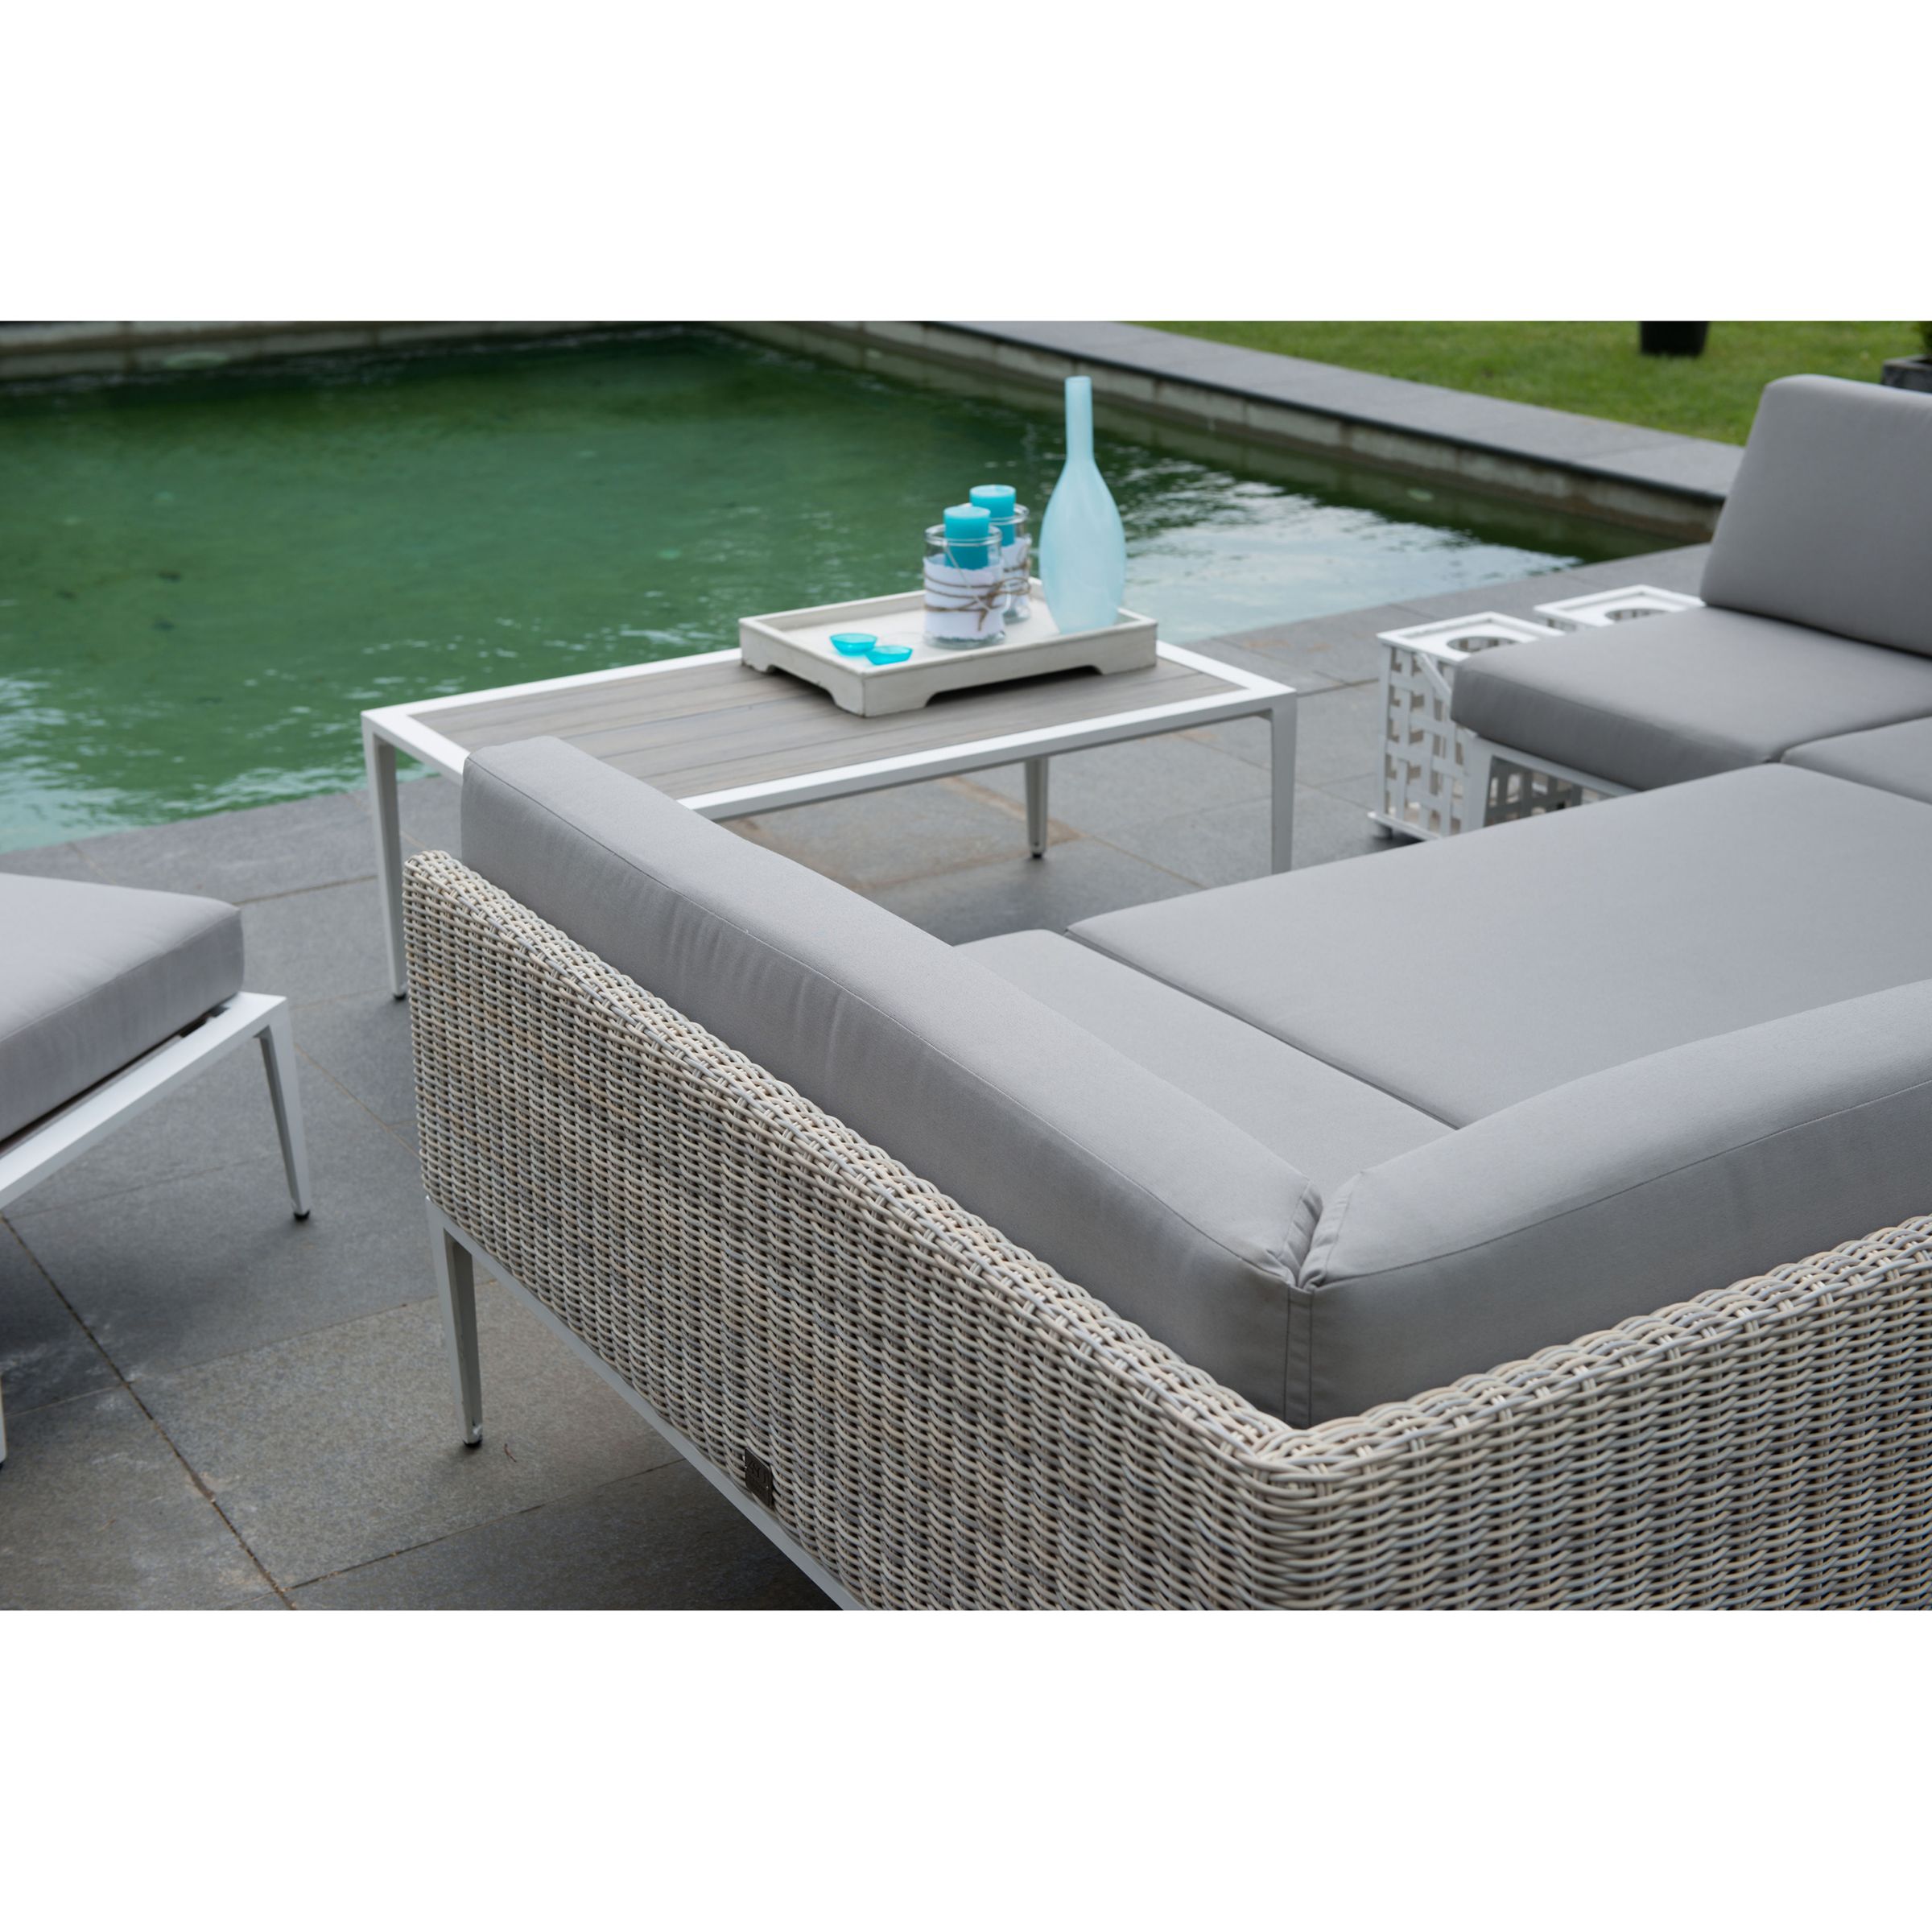 4 Seasons Outdoor Riviera Modular Daybed, Provance